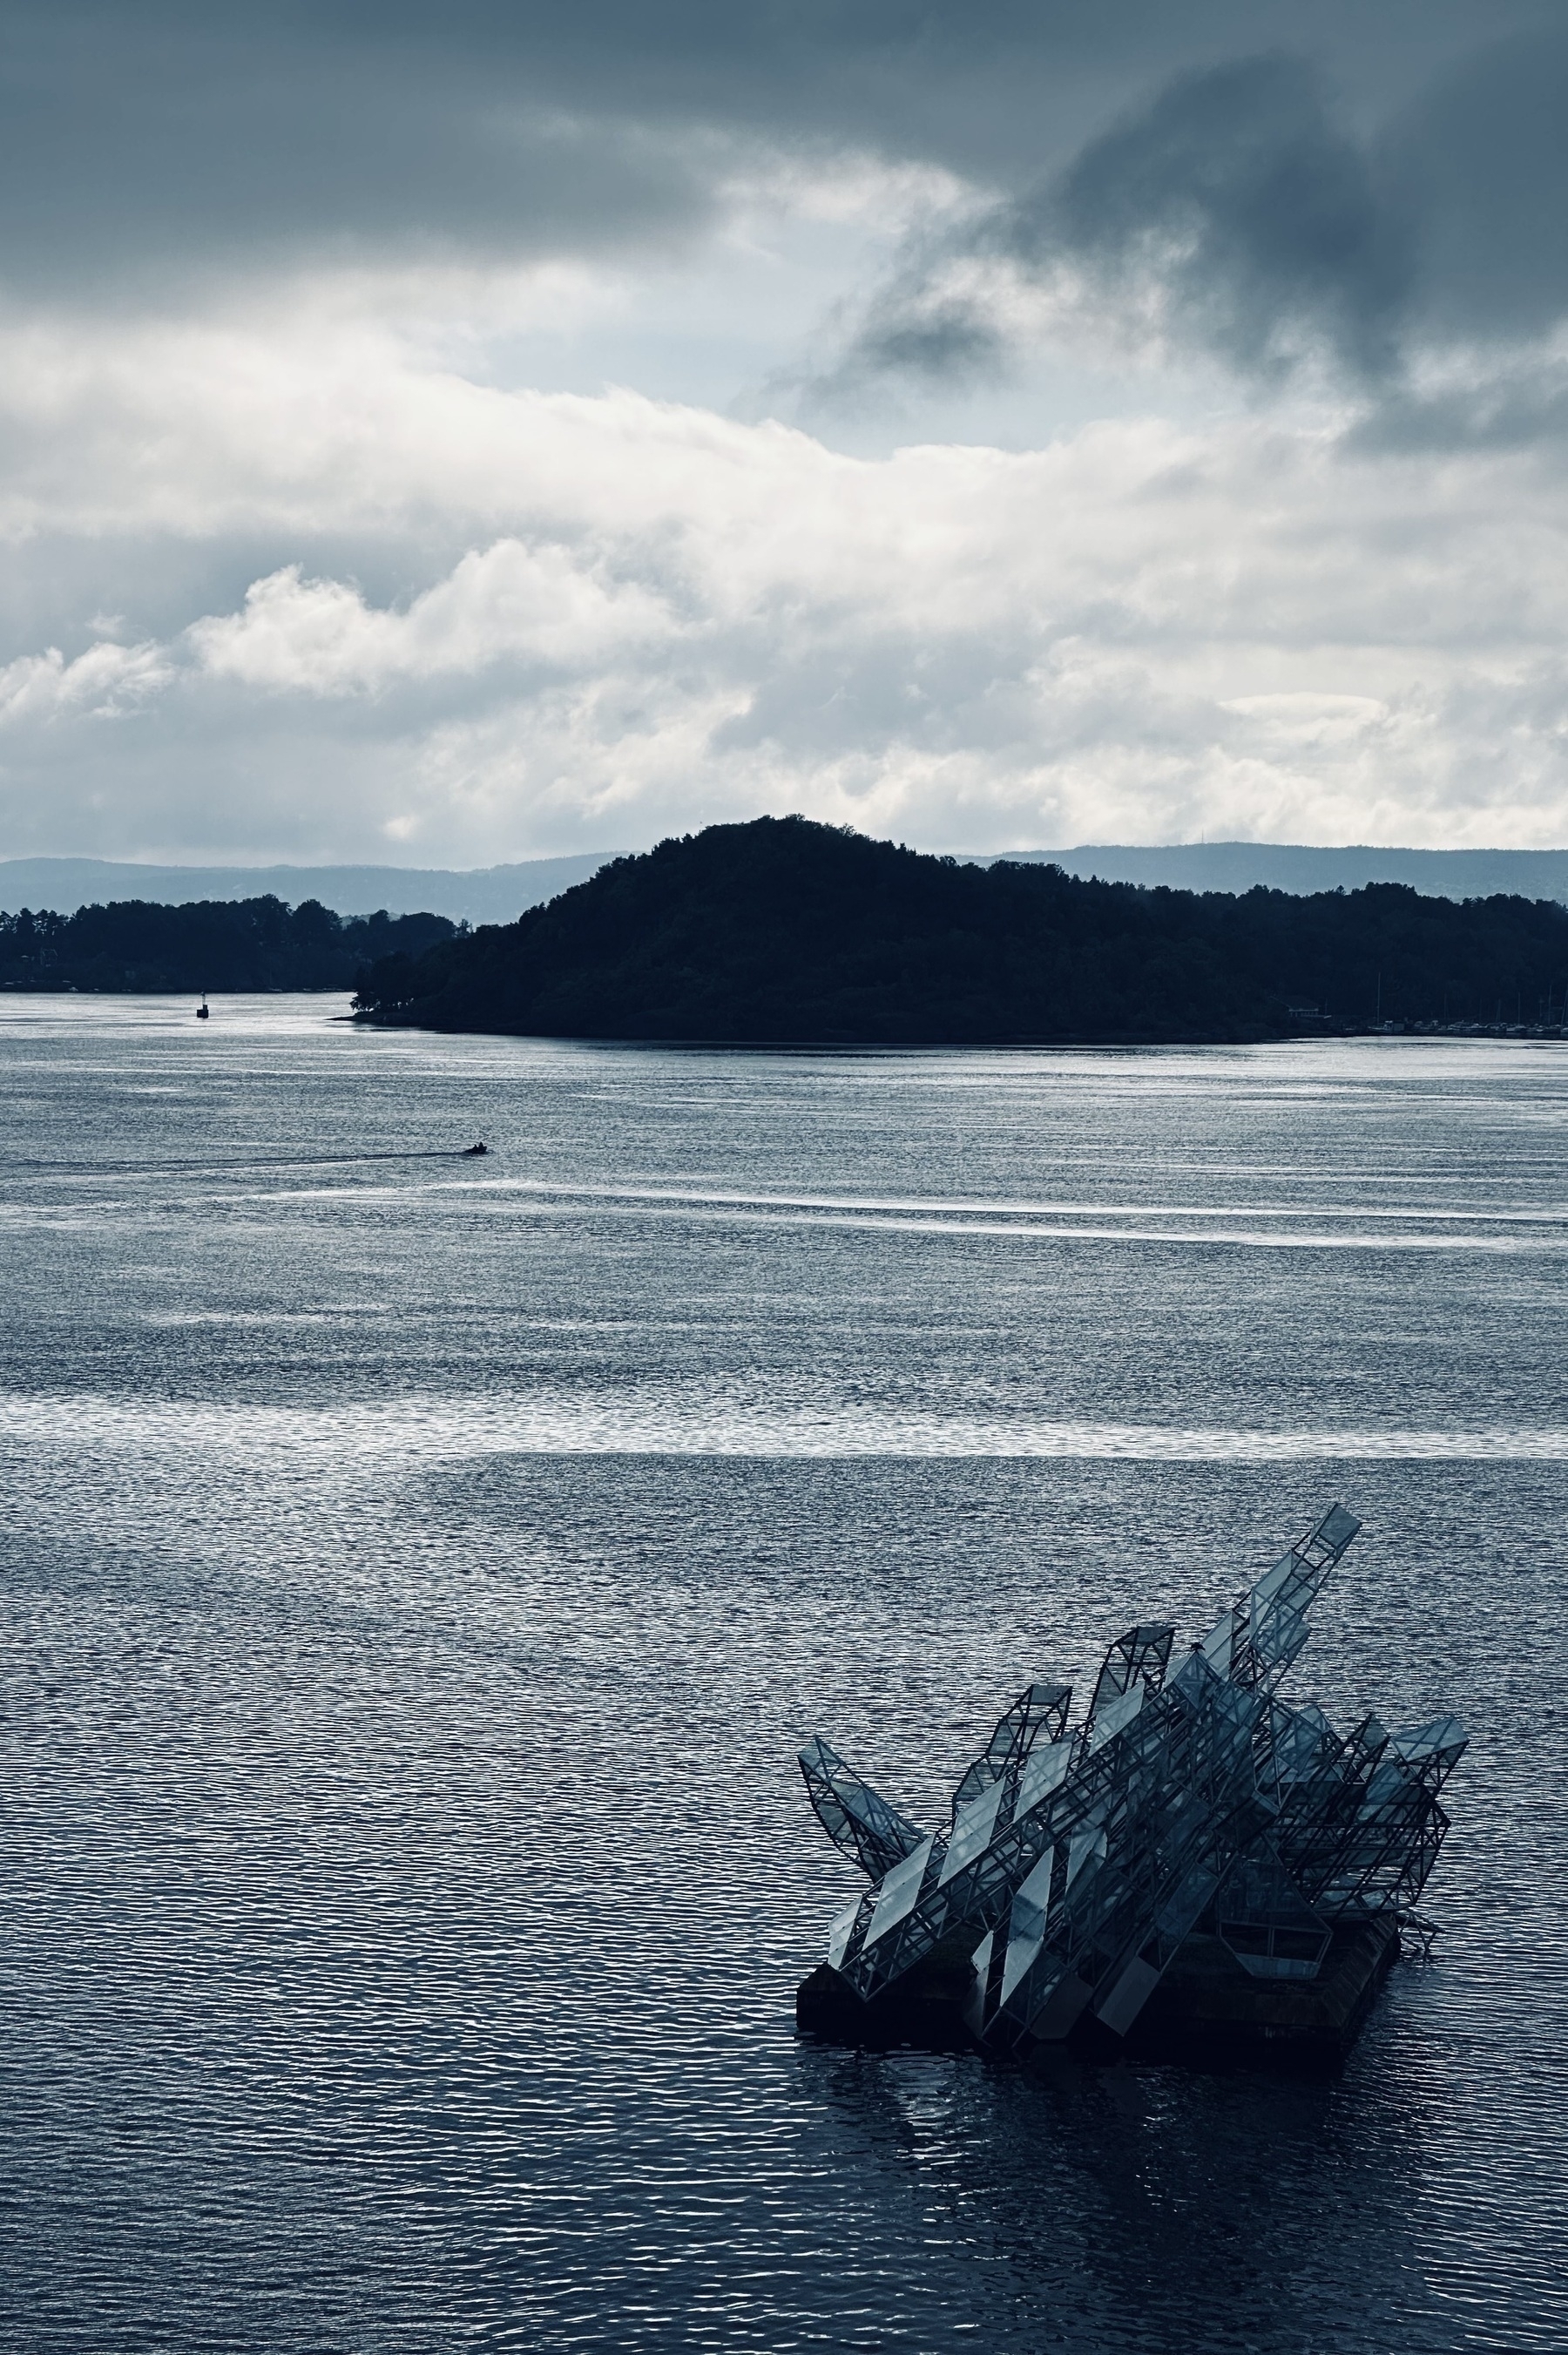 A sculpture made of shards of glass in Oslo harbour, with hills and a cloudy sky in the background.